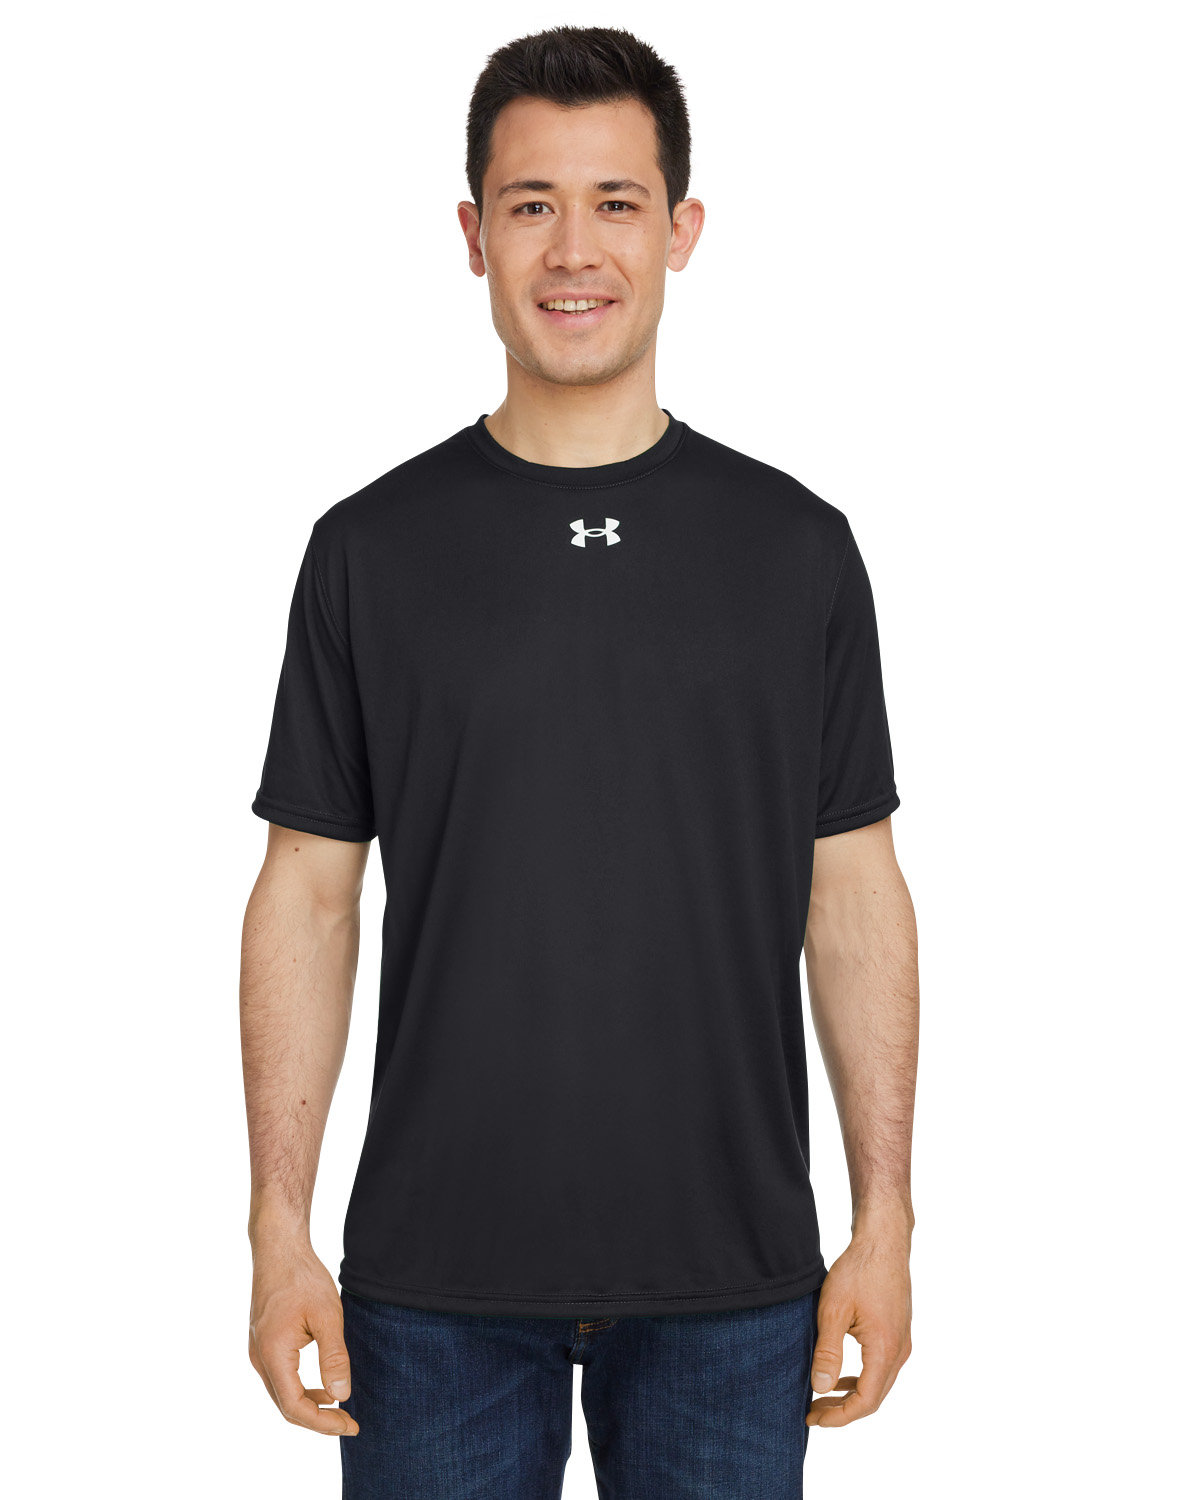 Under Armour Team Tech T-Shirt with Custom Embroidery, 1376842